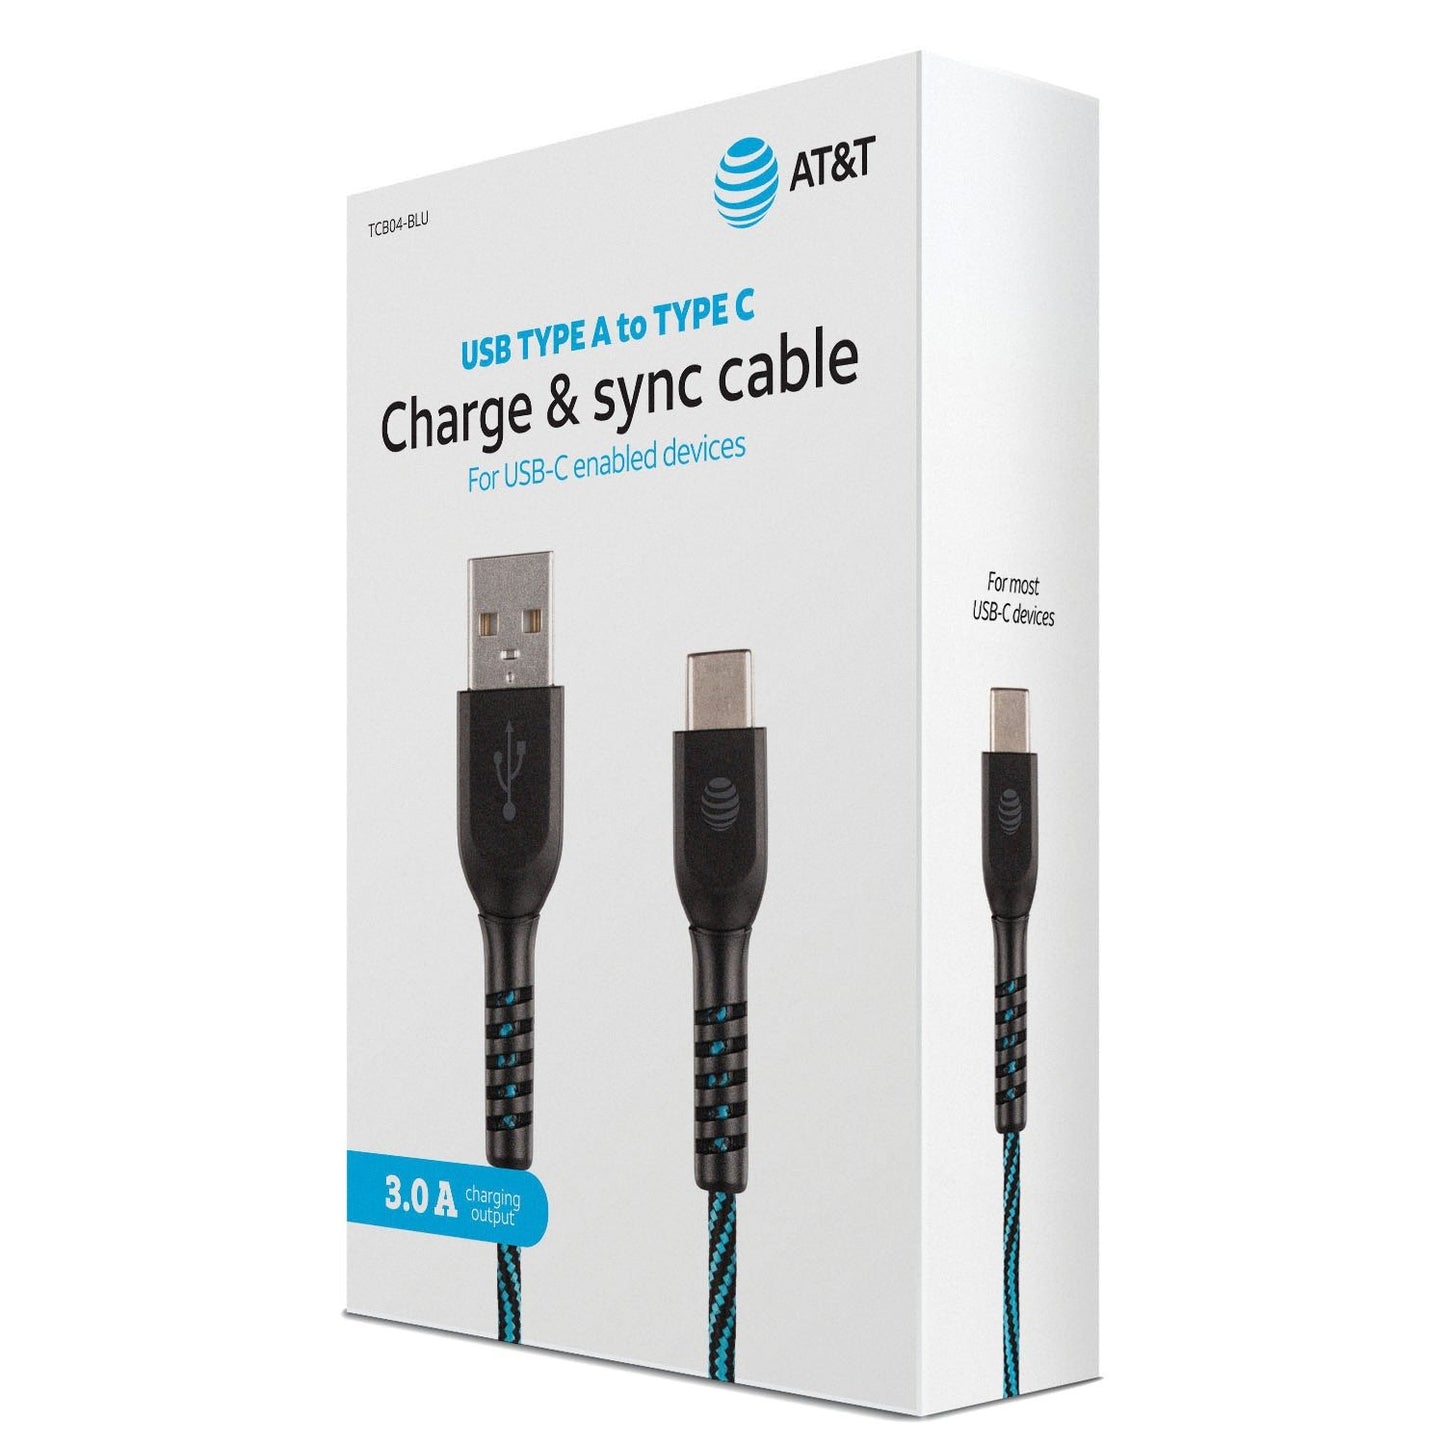 AT&T  TCB04-BLU 4-Foot Charge and Sync USB - Type-C Cable (Blue)